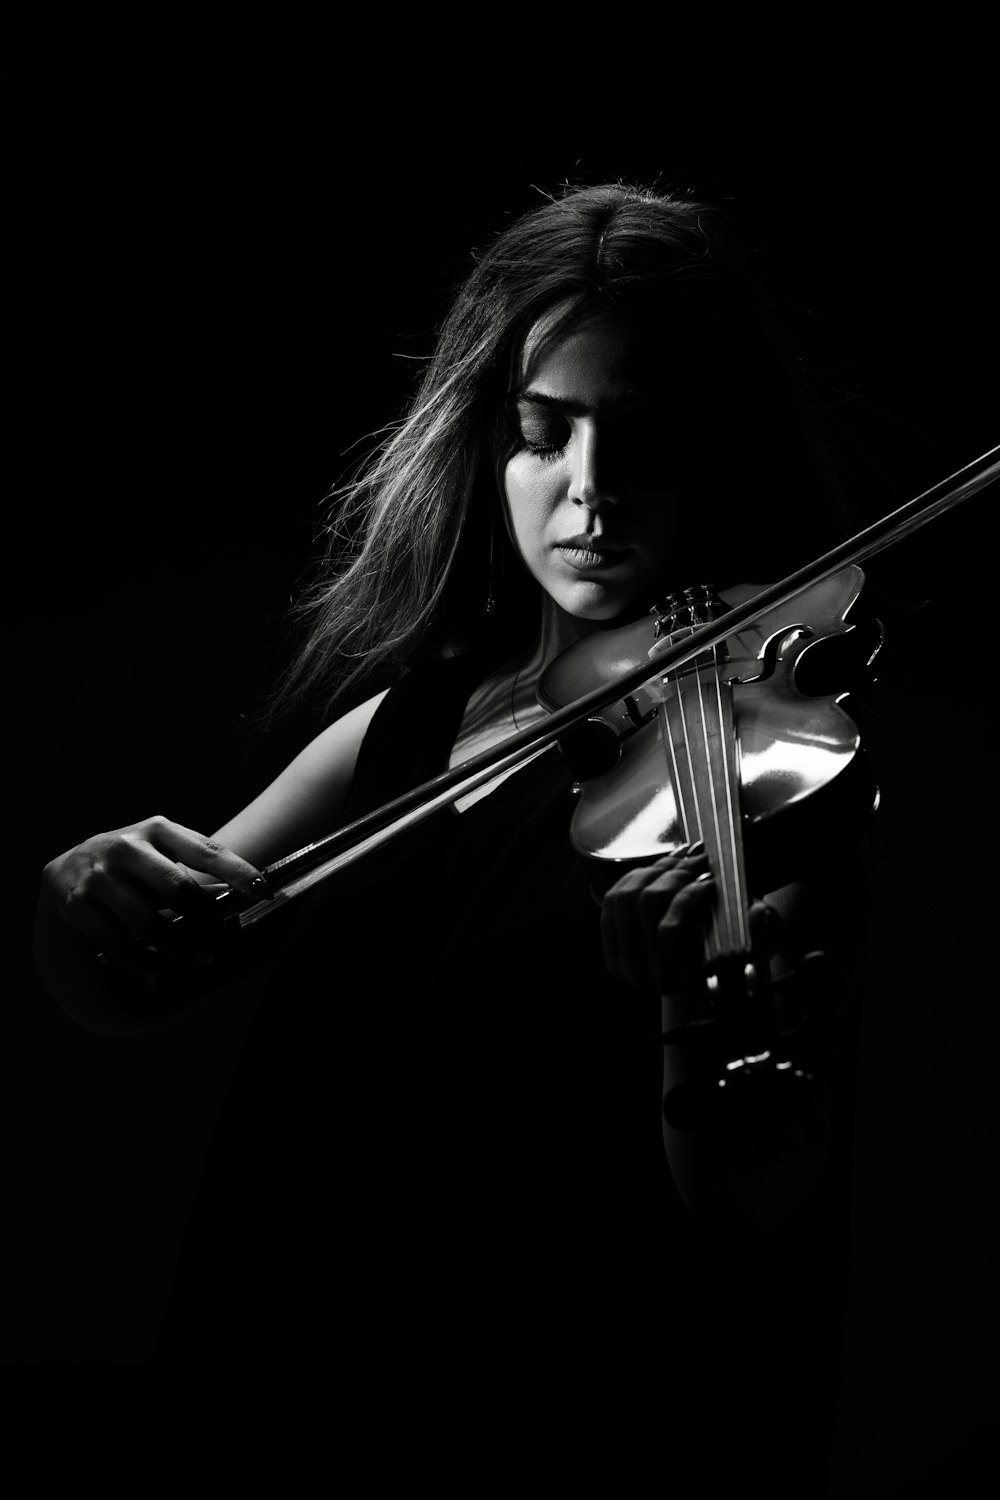 woman playing violin in grayscale photography